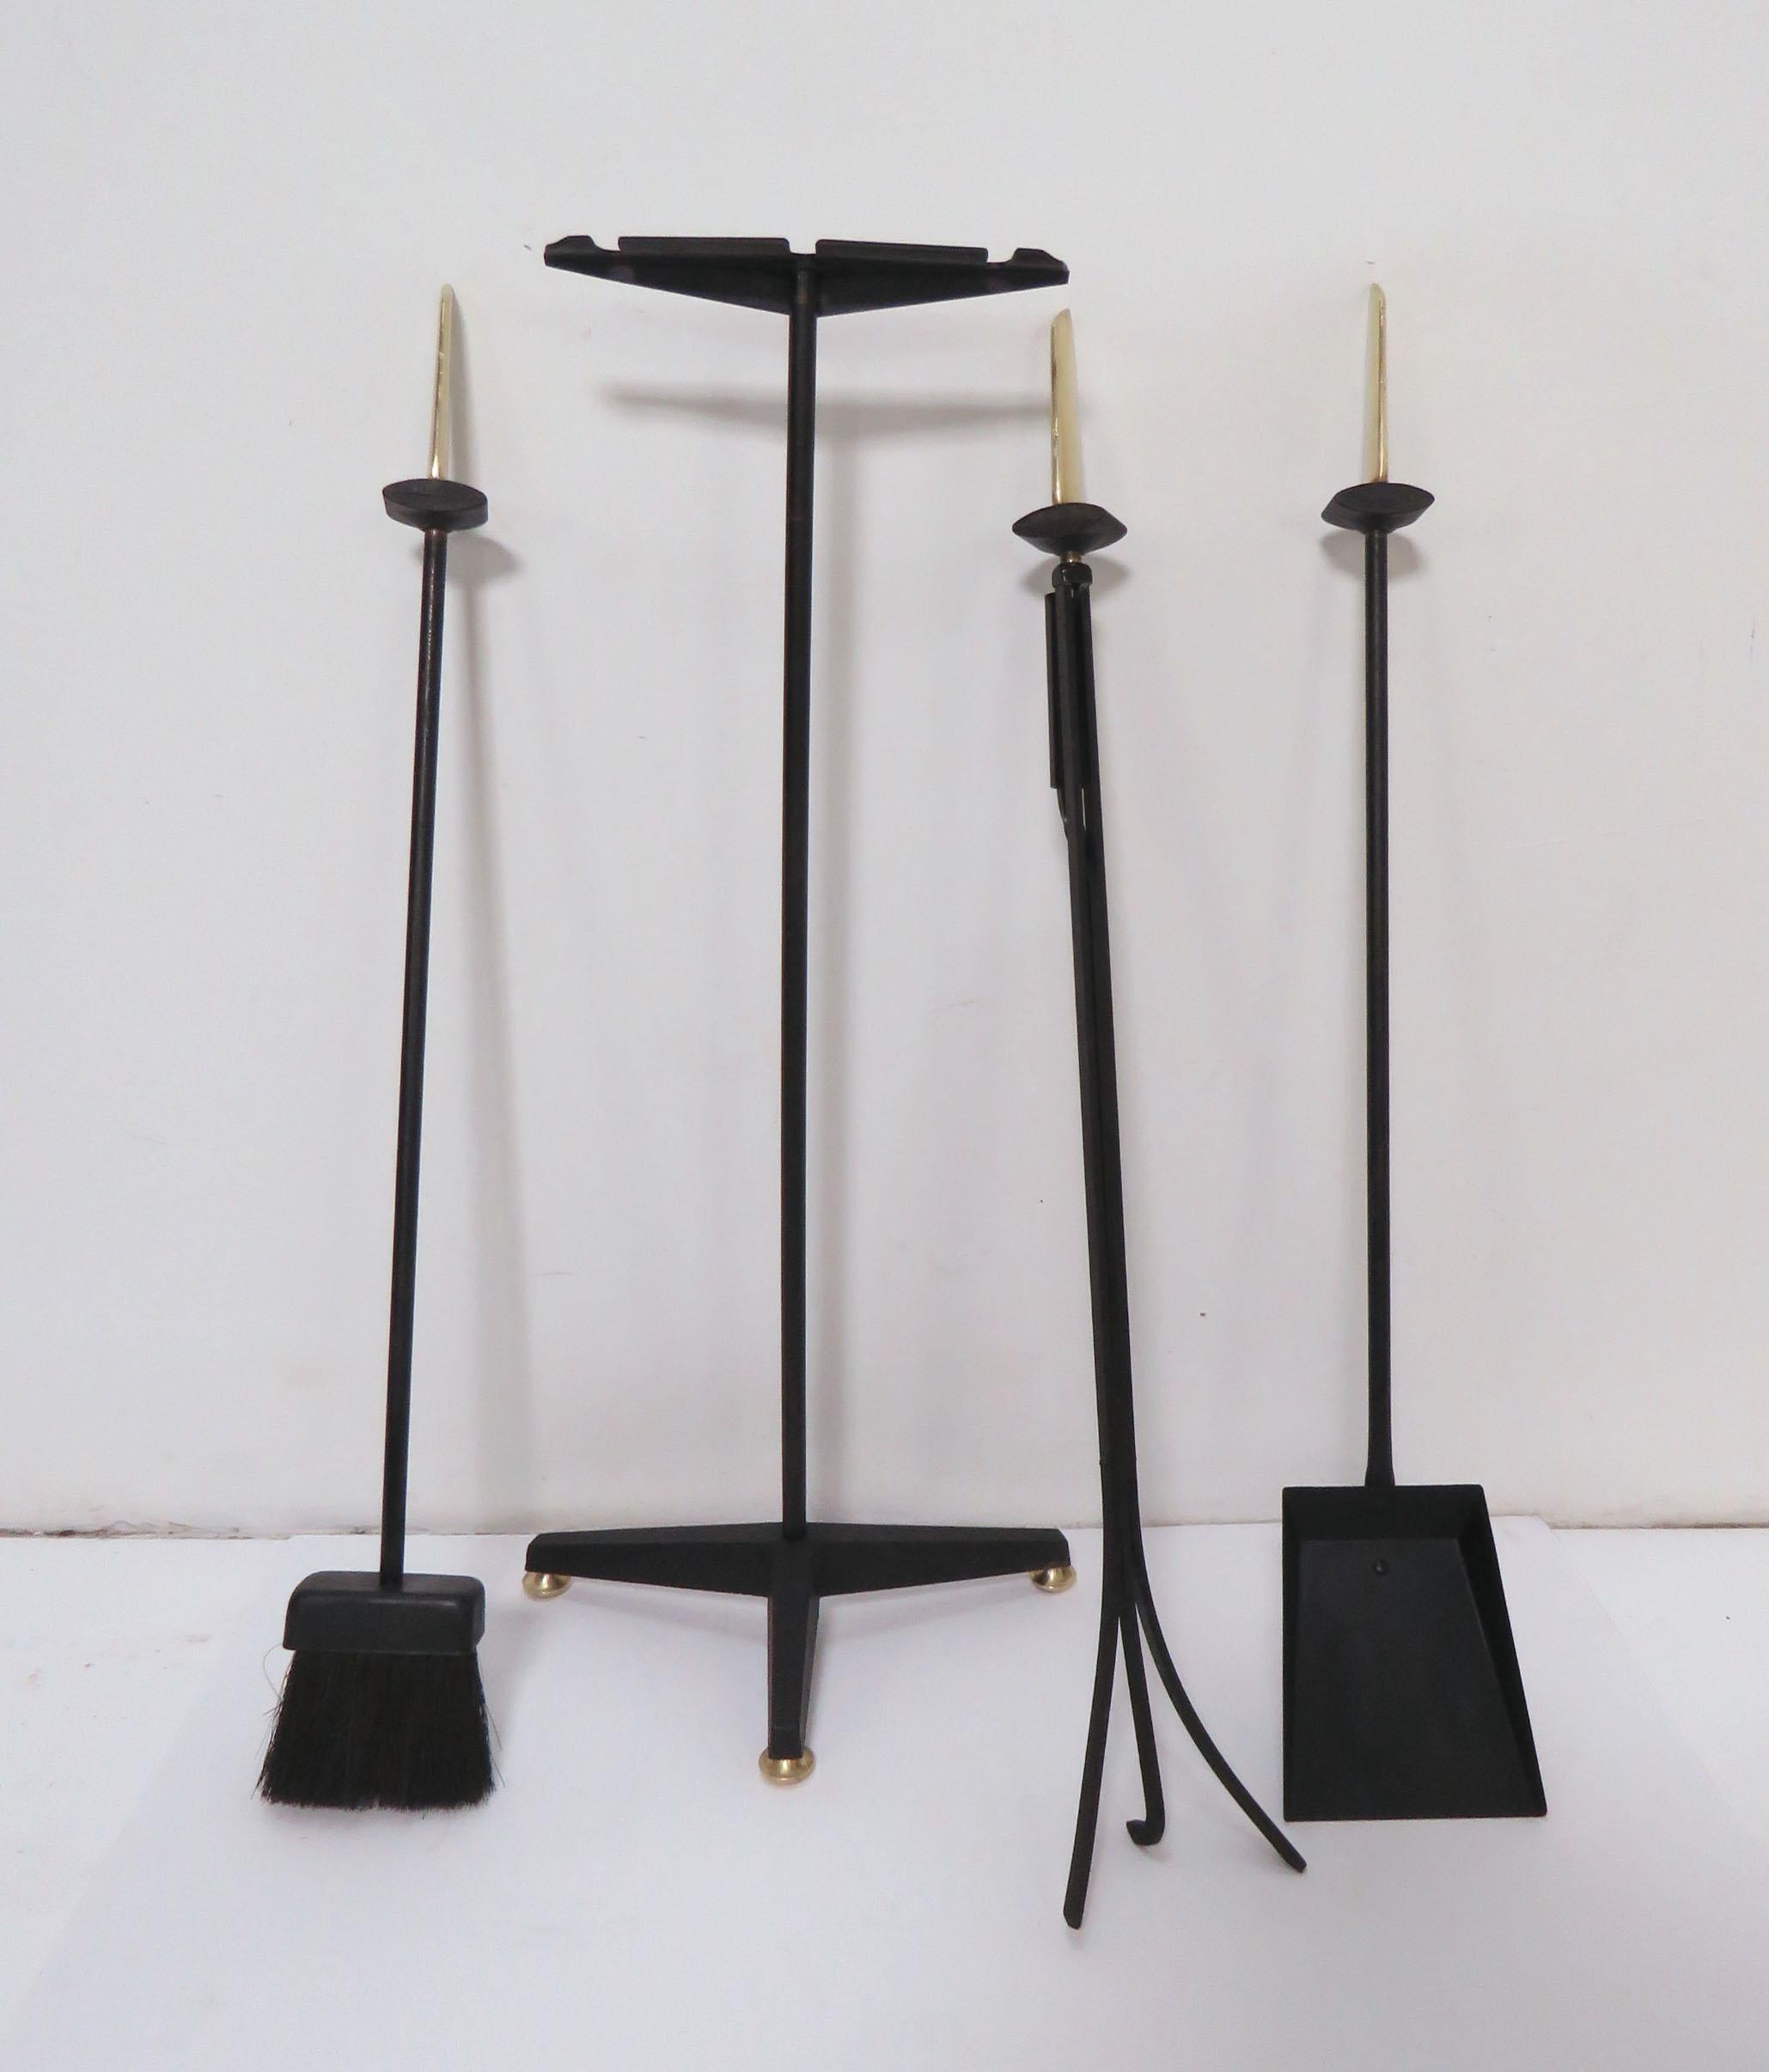 American Modernist Donald Deskey Fireplace Tools Set for Bennett in Brass and Forged Iron